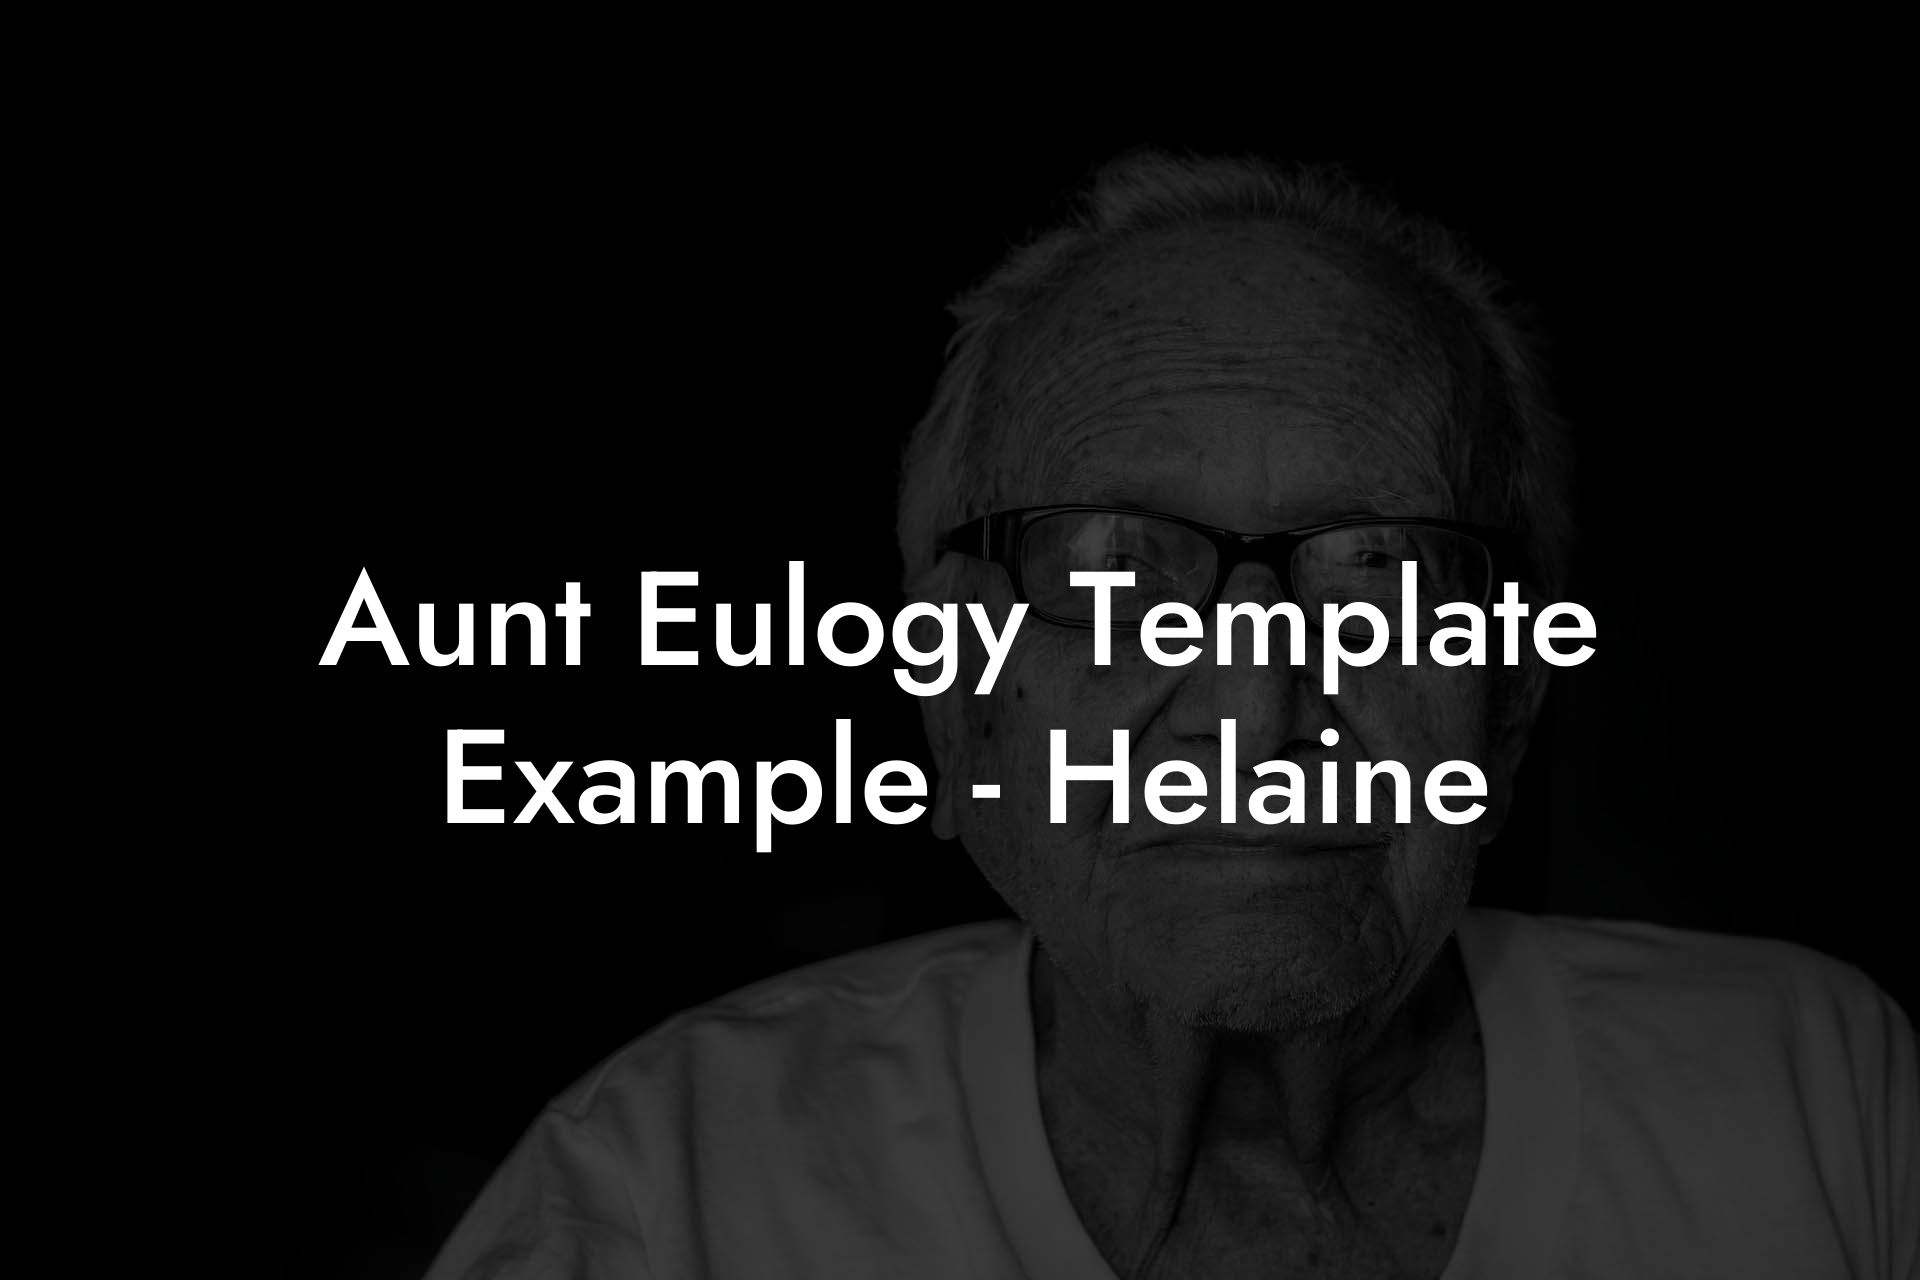 Aunt Eulogy Template Example - Helaine